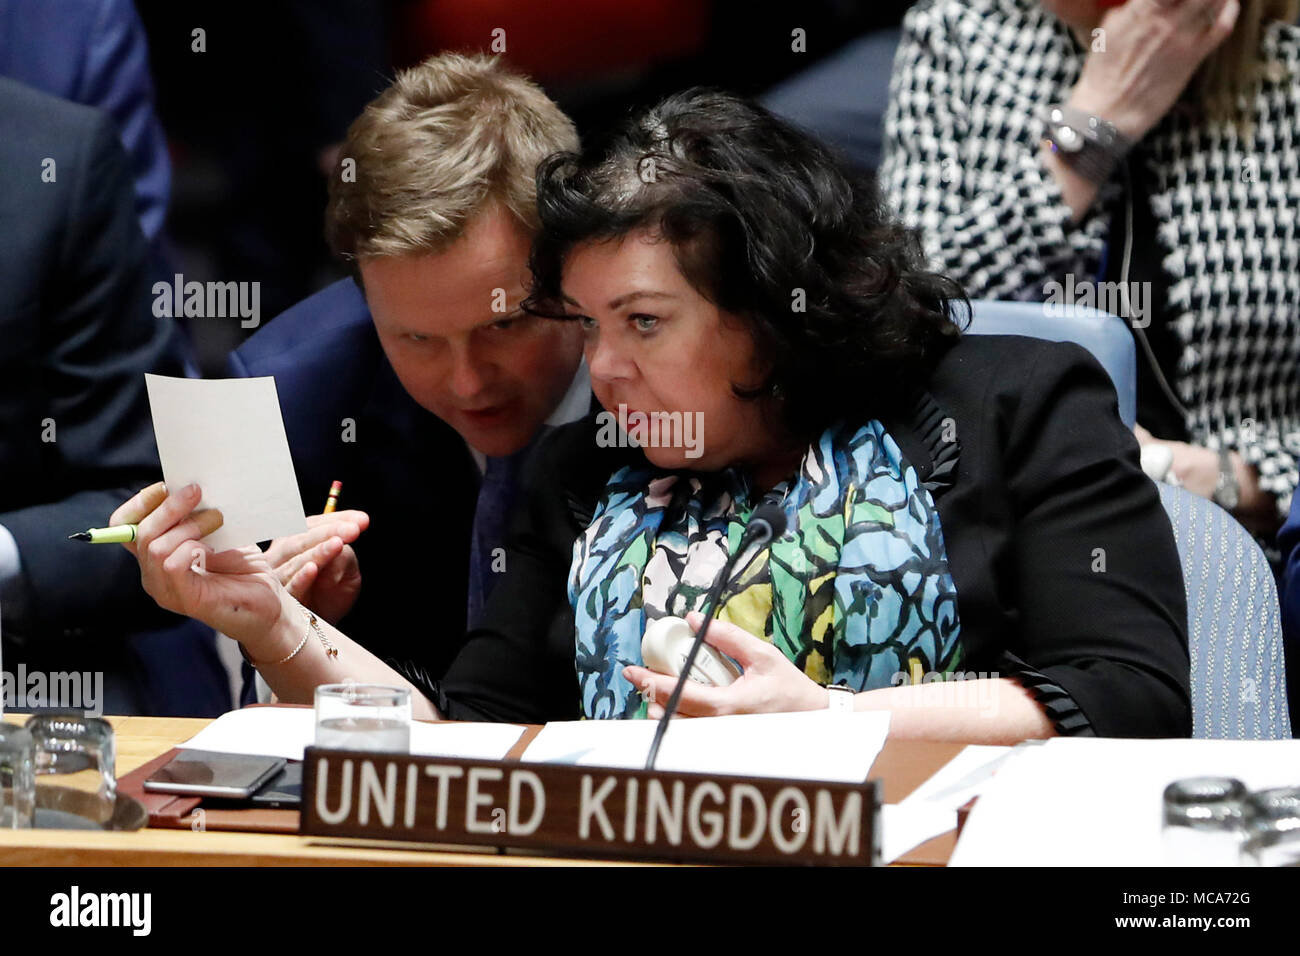 Untied Nations. 14th Apr, 2018. British Ambassador to the United Nations Karen Pierce (Front) listens to one of her delegation during a Security Council emergency meeting on Syria at the UN headquarters in New York, April 14, 2018. UN Security Council held an emergency meeting on Syria requested by Russia on Saturday. UN Secretary-General Antonio Guterres expressed concern over Friday's joint military action against Syria by the United States, France and Britain, and called for adherence to the UN Charter and international law on the issue. Credit: Li Muzi/Xinhua/Alamy Live News Stock Photo